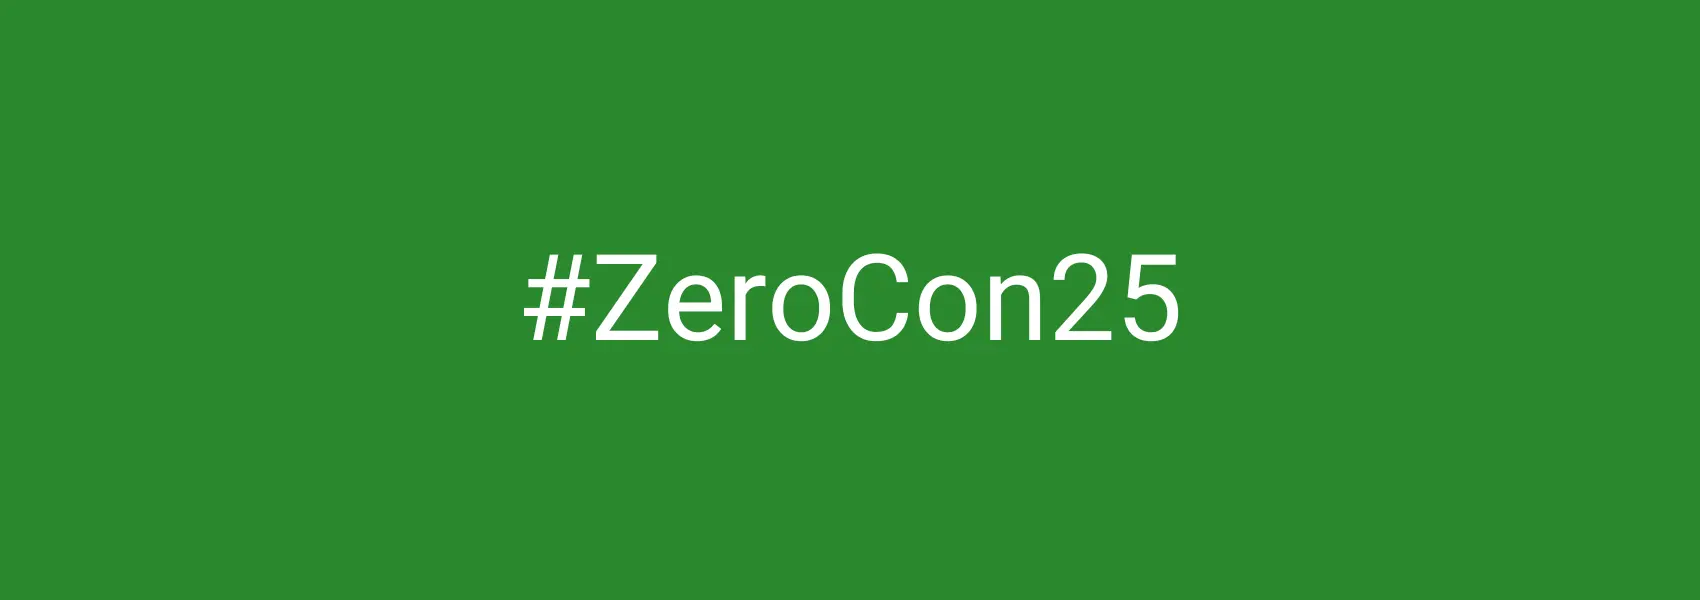 darg green background with bold white letters: #ZeroCon25